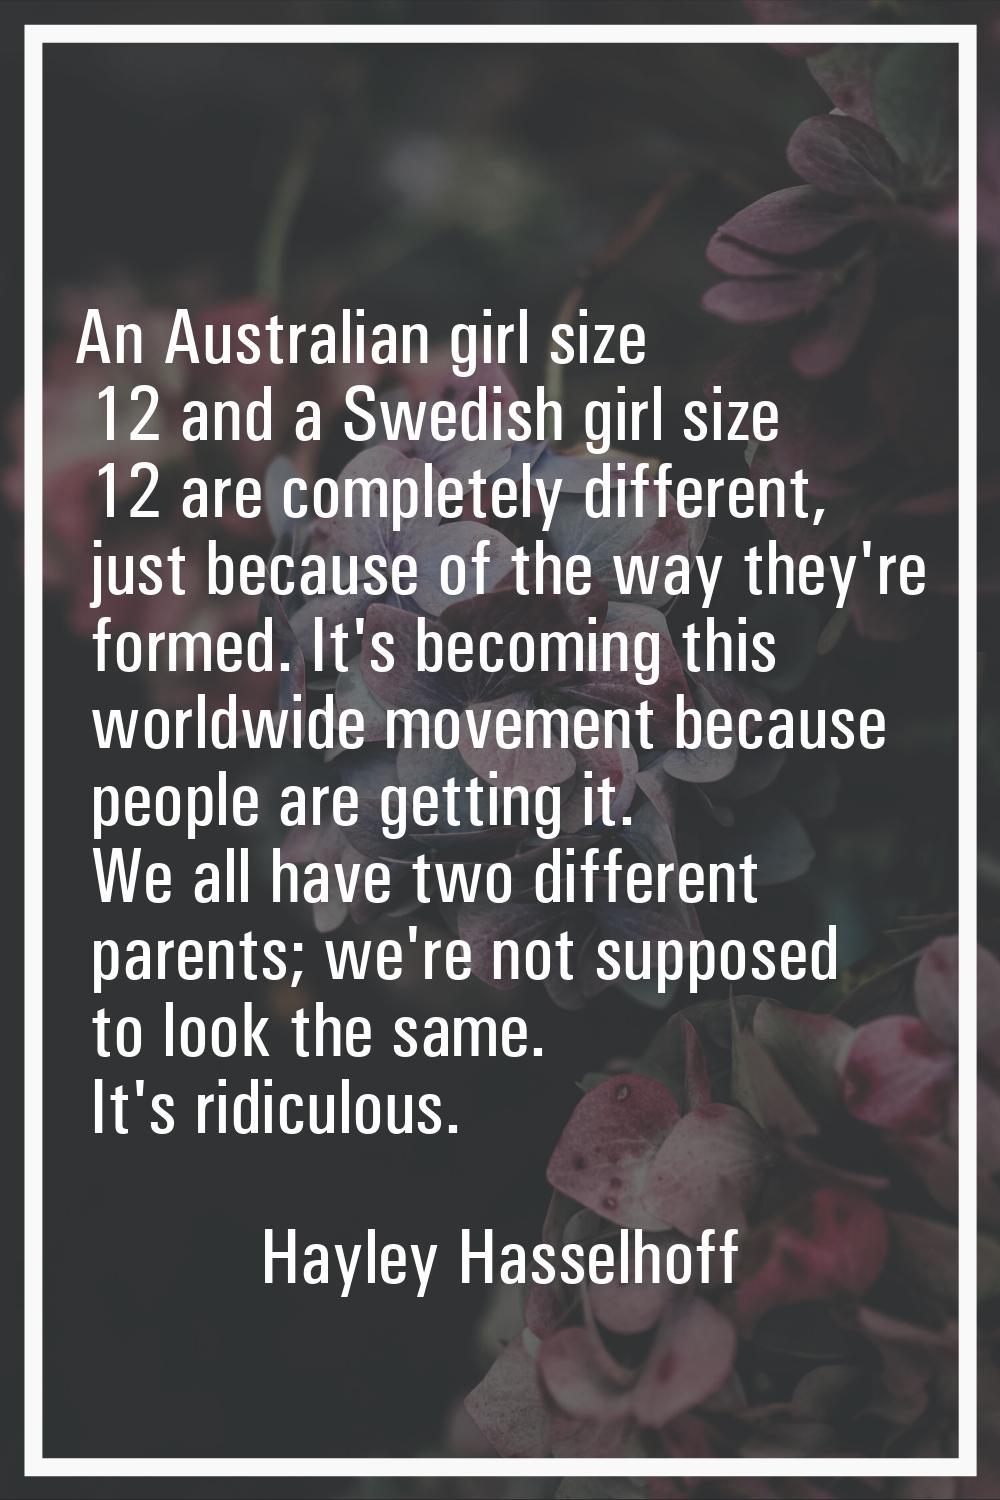 An Australian girl size 12 and a Swedish girl size 12 are completely different, just because of the